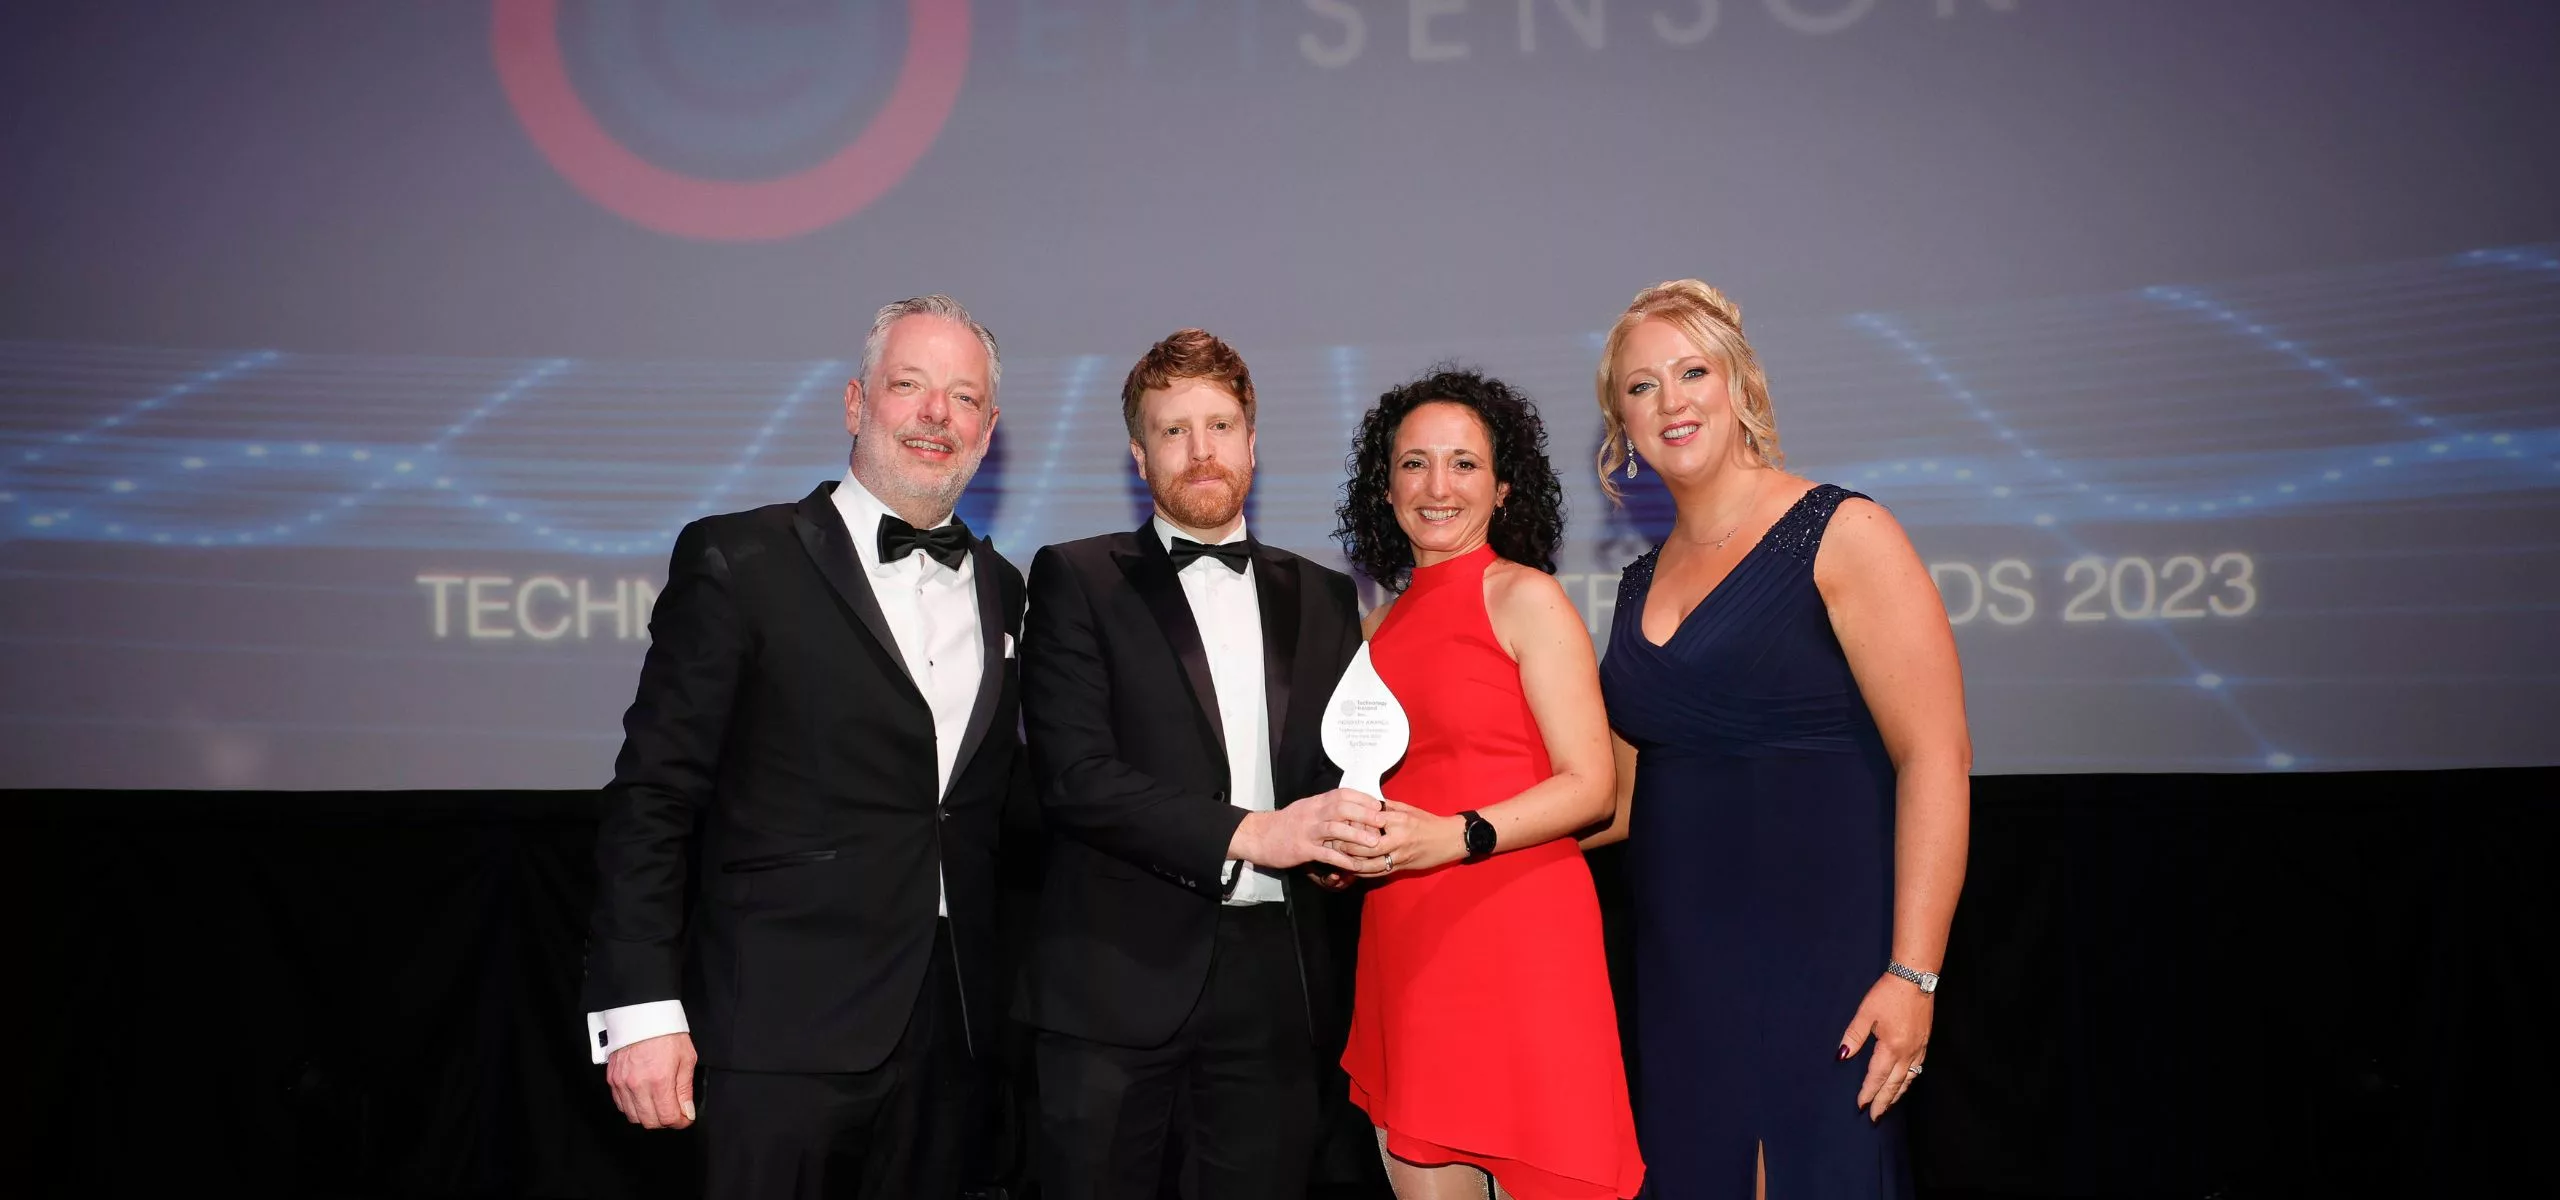 EpiSensor Wins ‘Technology Innovation of the Year 2023’ at the Technology Ireland Industry Awards